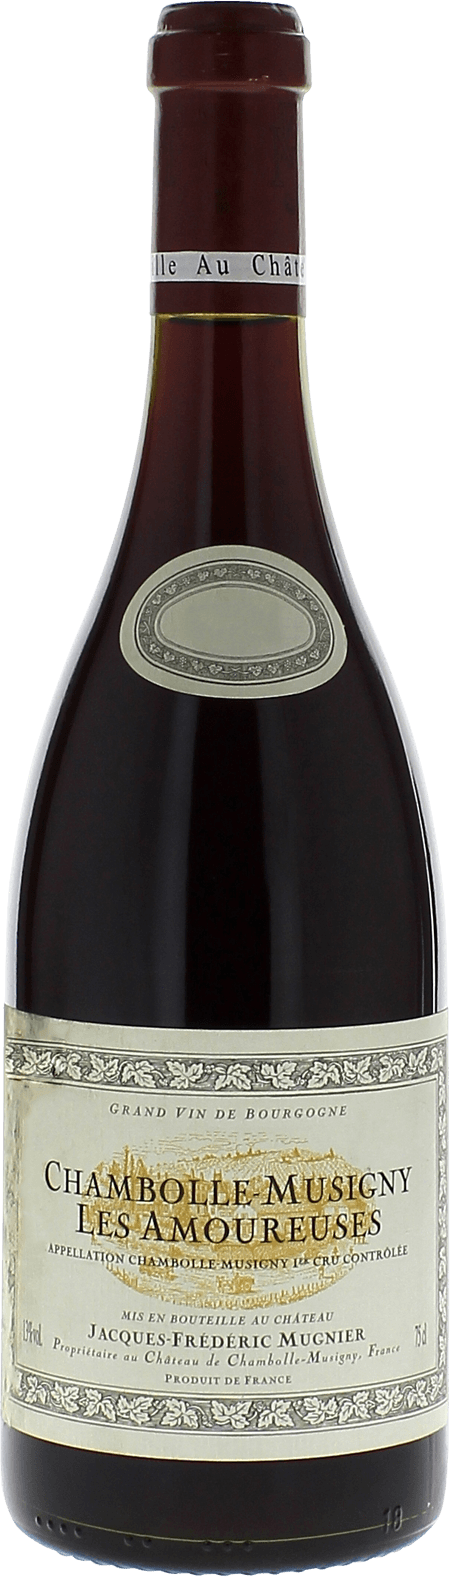 Chambolle musigny 1er cru les amoureuses 2012 Domaine MUGNIER Jacques Frederic, Bourgogne rouge